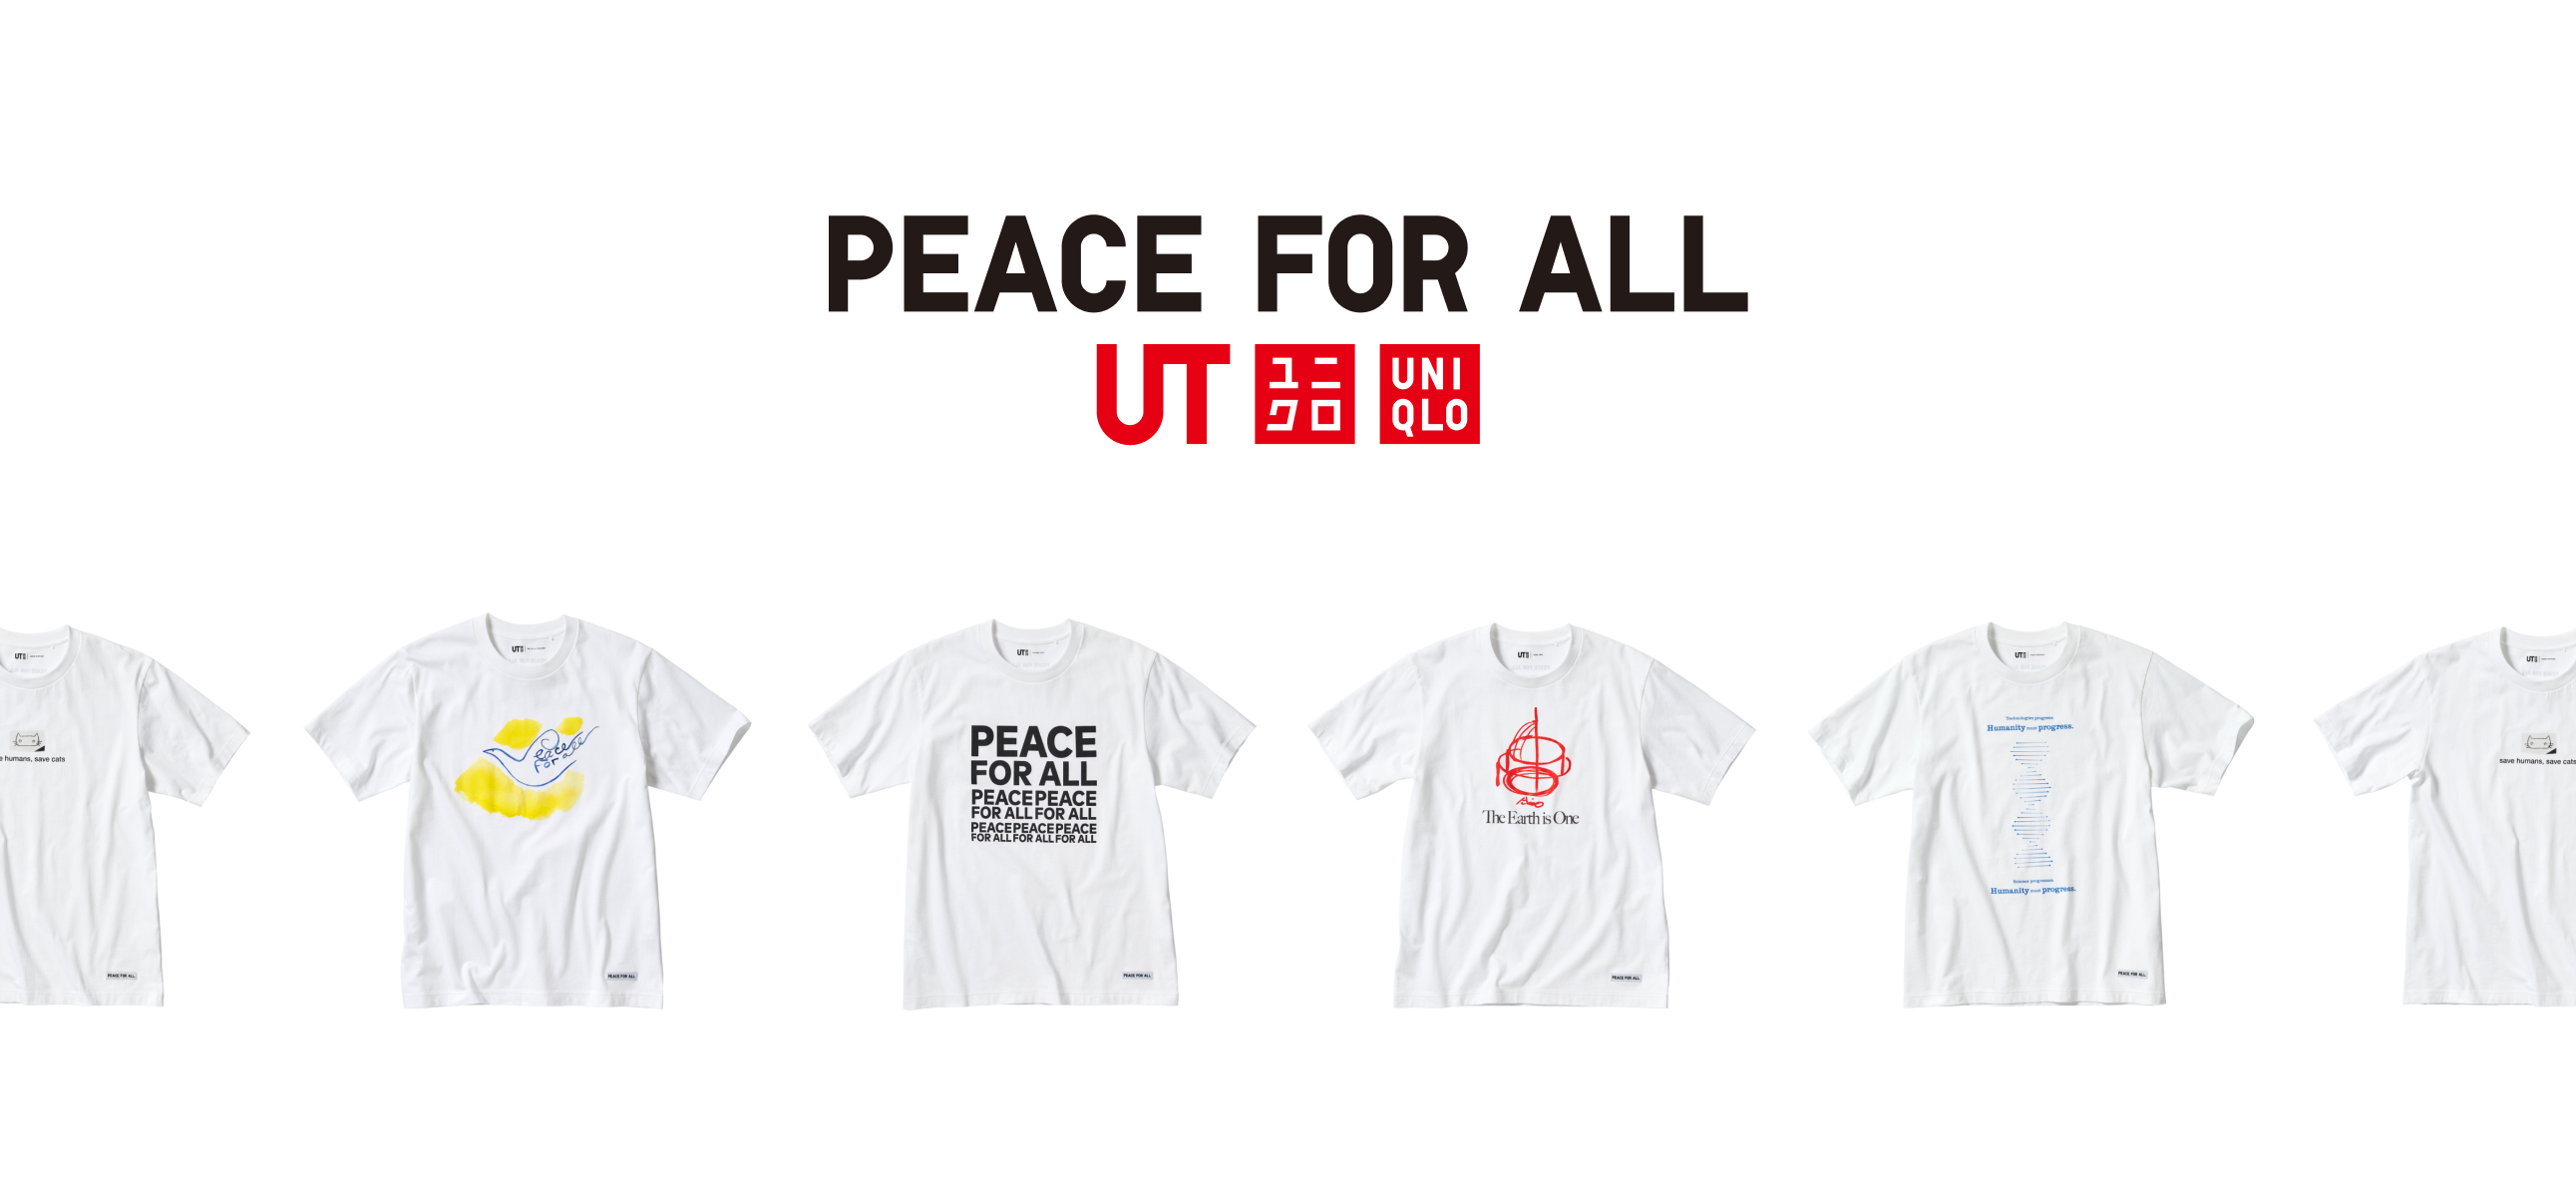 UNIQLO Philippines on Twitter Text message celebrates the work of artists  who use language as a medium We are excited to partner with these artists  to bring their words to life UniqloUT 